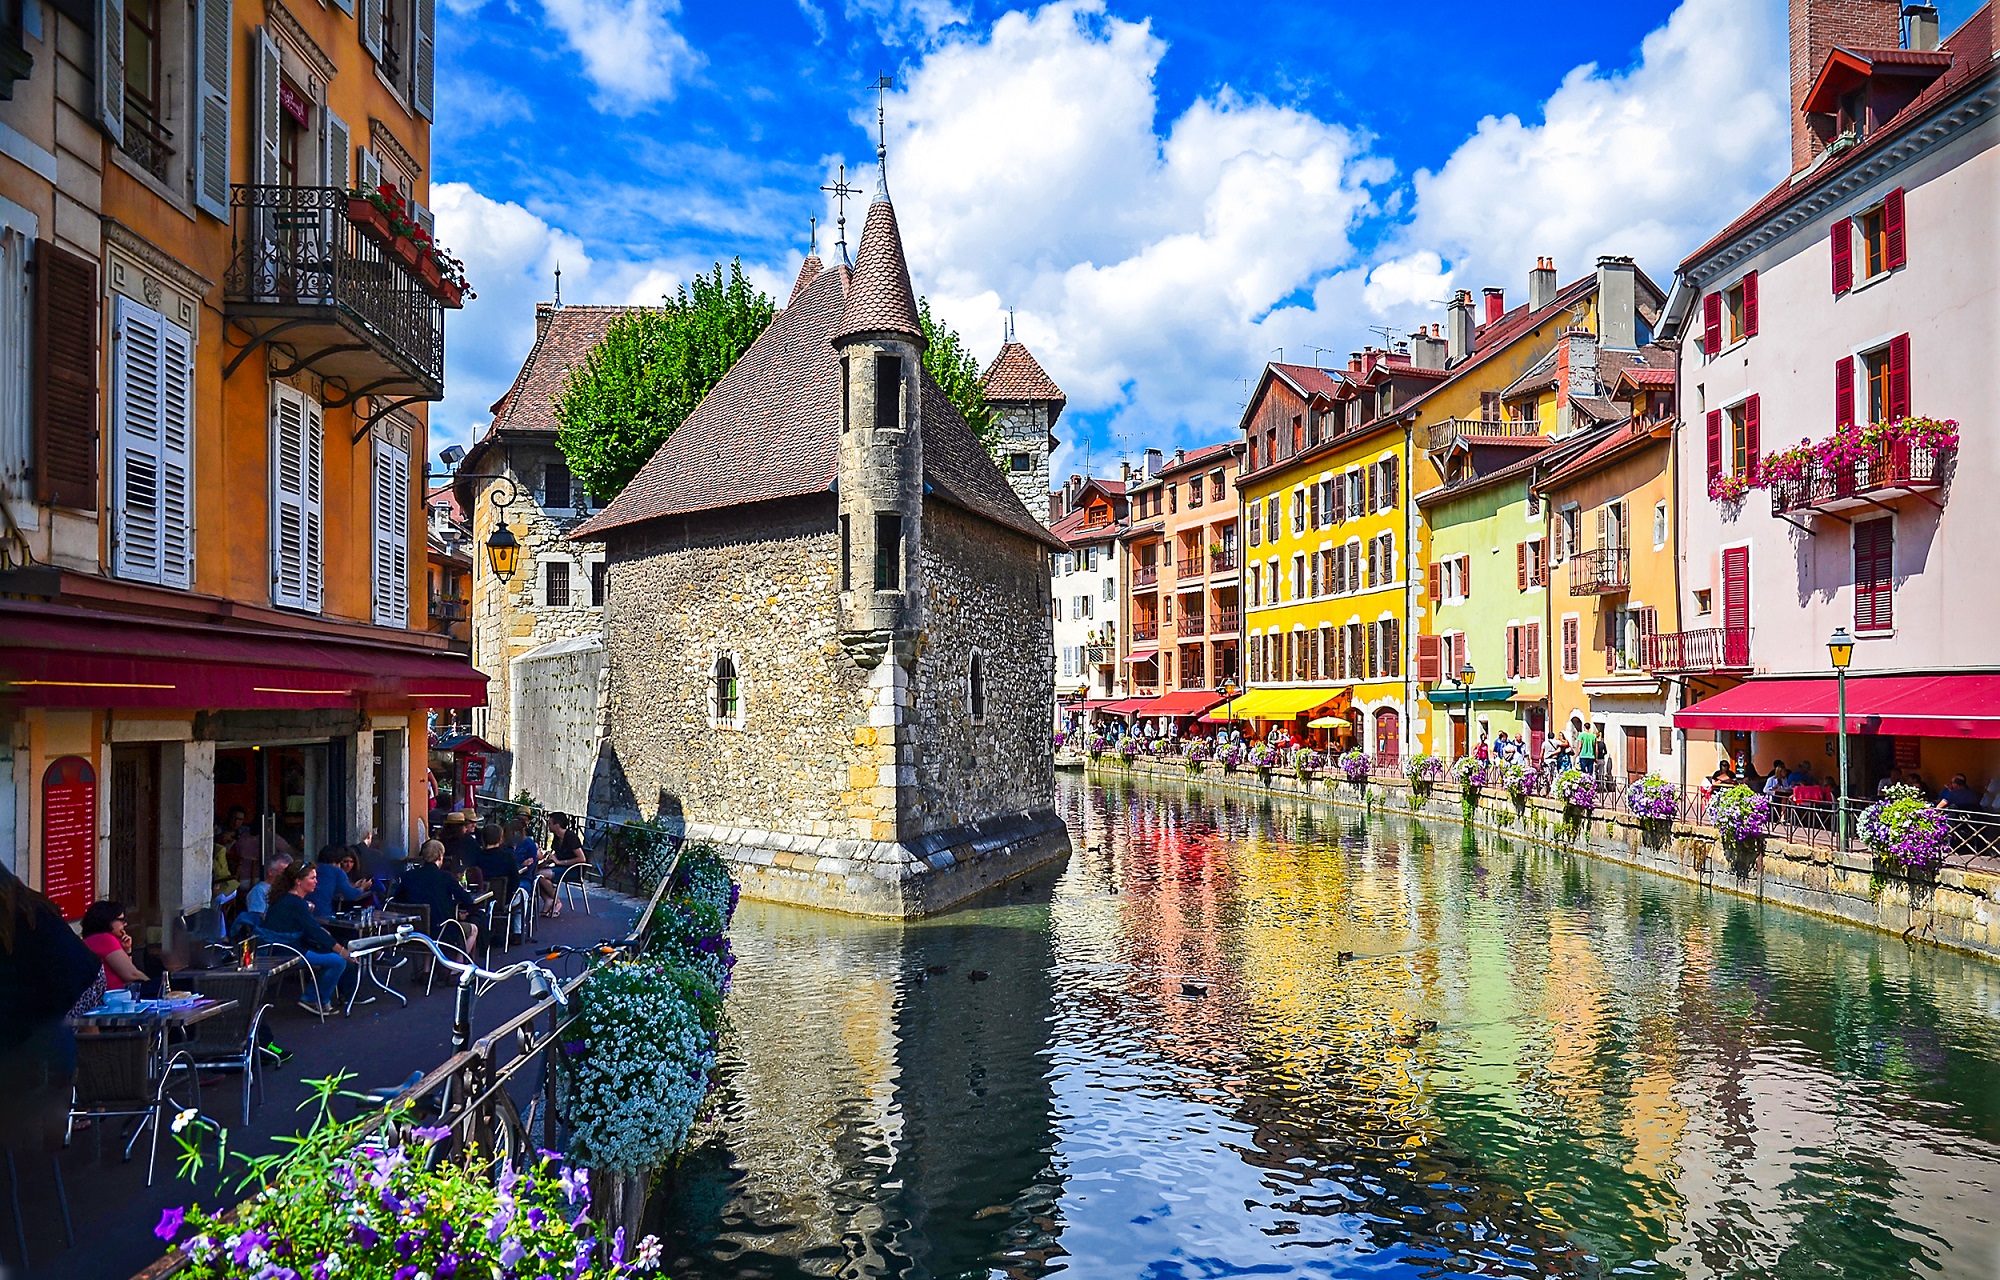 Island-Palace-Annecy-in-France.-River-town-in-France ...
